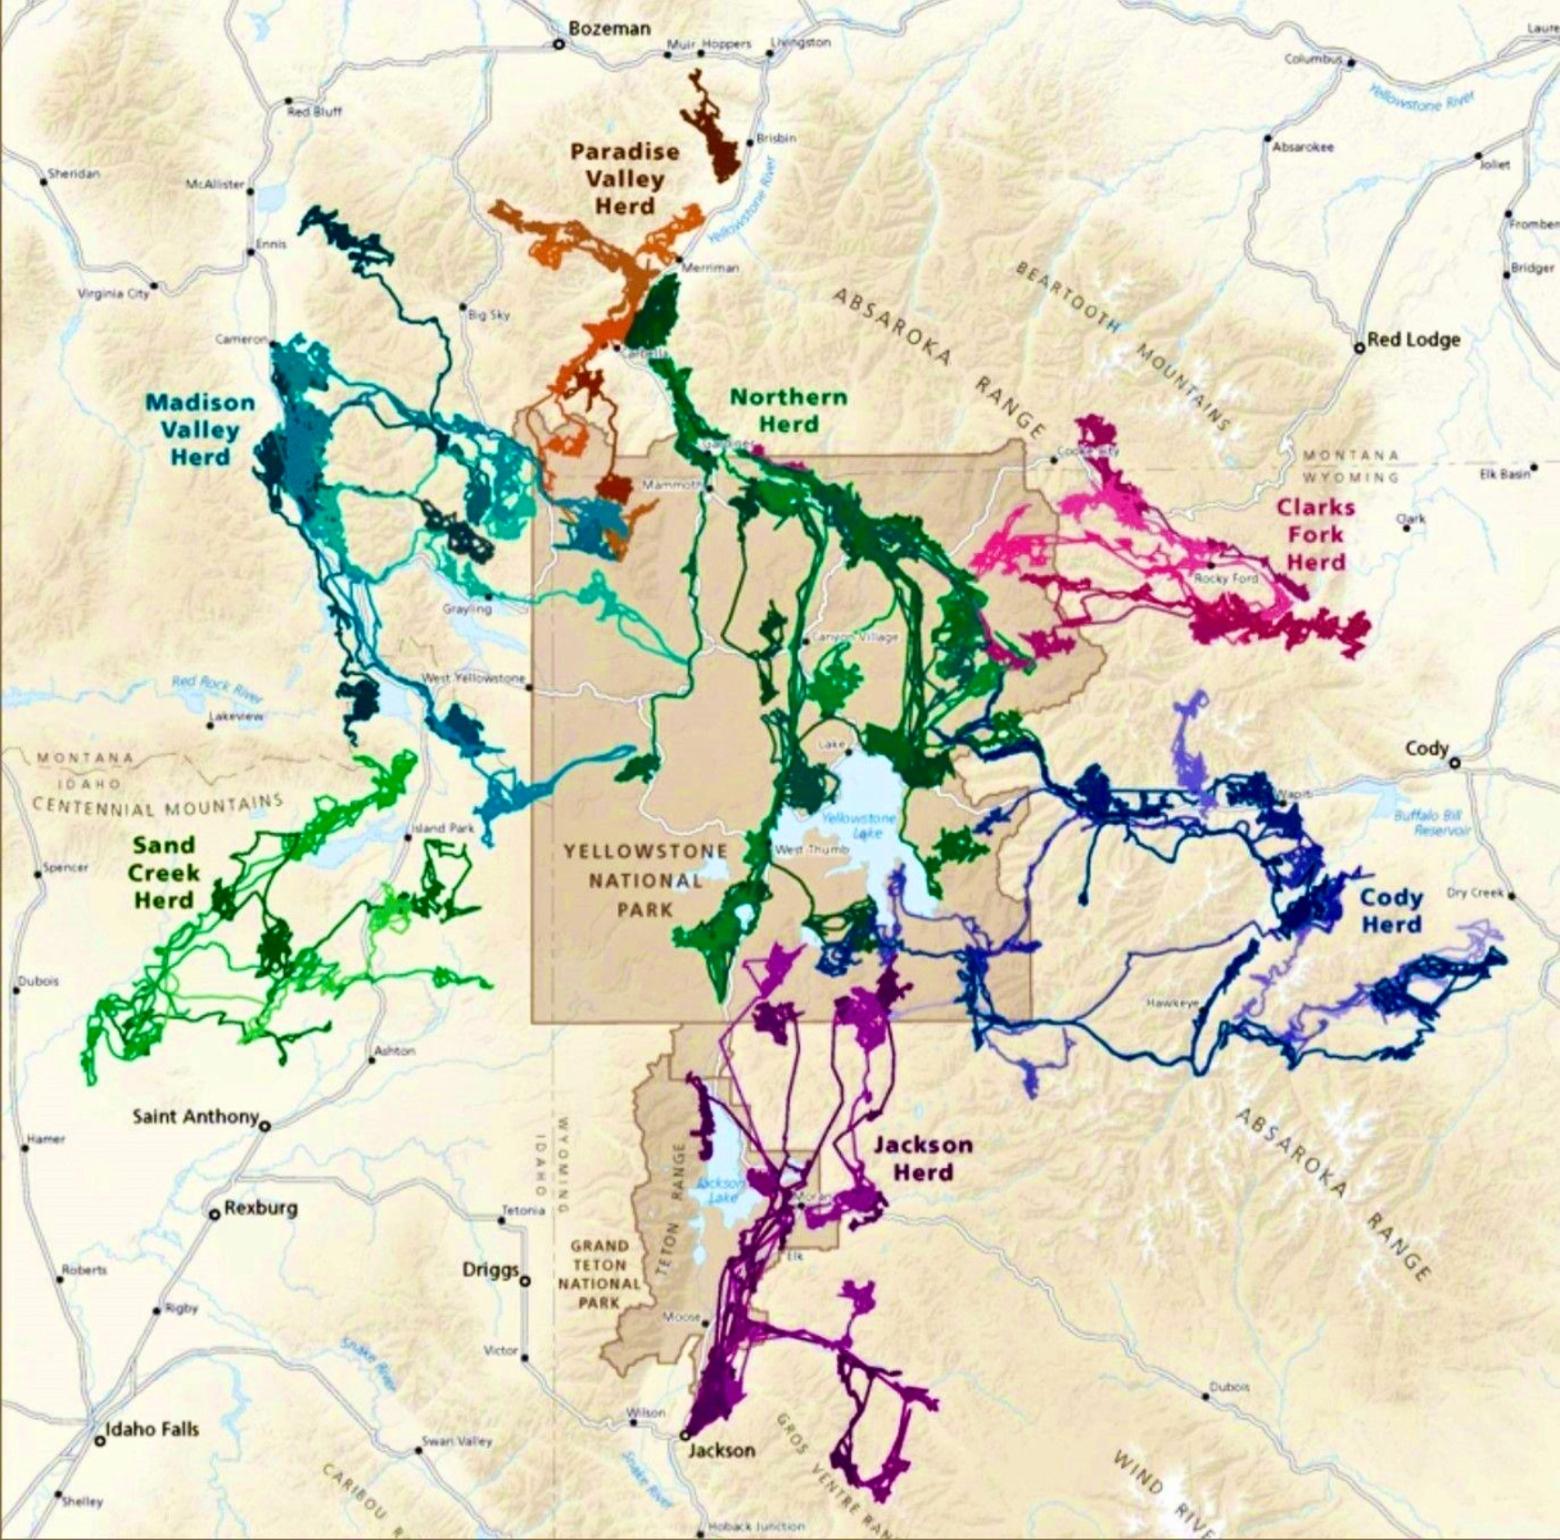 This map showing the remarkable long-distance migrations of a dozen different elk herds in Greater Yellowstone speaks to one of the main reasons why this ecosystem is unparalleled in the Lower 48 and iconic in the world. The corridors for elk, mule deer and pronghorn only still exist here because they remain unfragmented by human development or inundated by large numbers of people using the landscape. Can they persevere given development trends and outdoor recreation reaching industrial-strength levels? Photo courtesy Wyoming Migration Initiative 